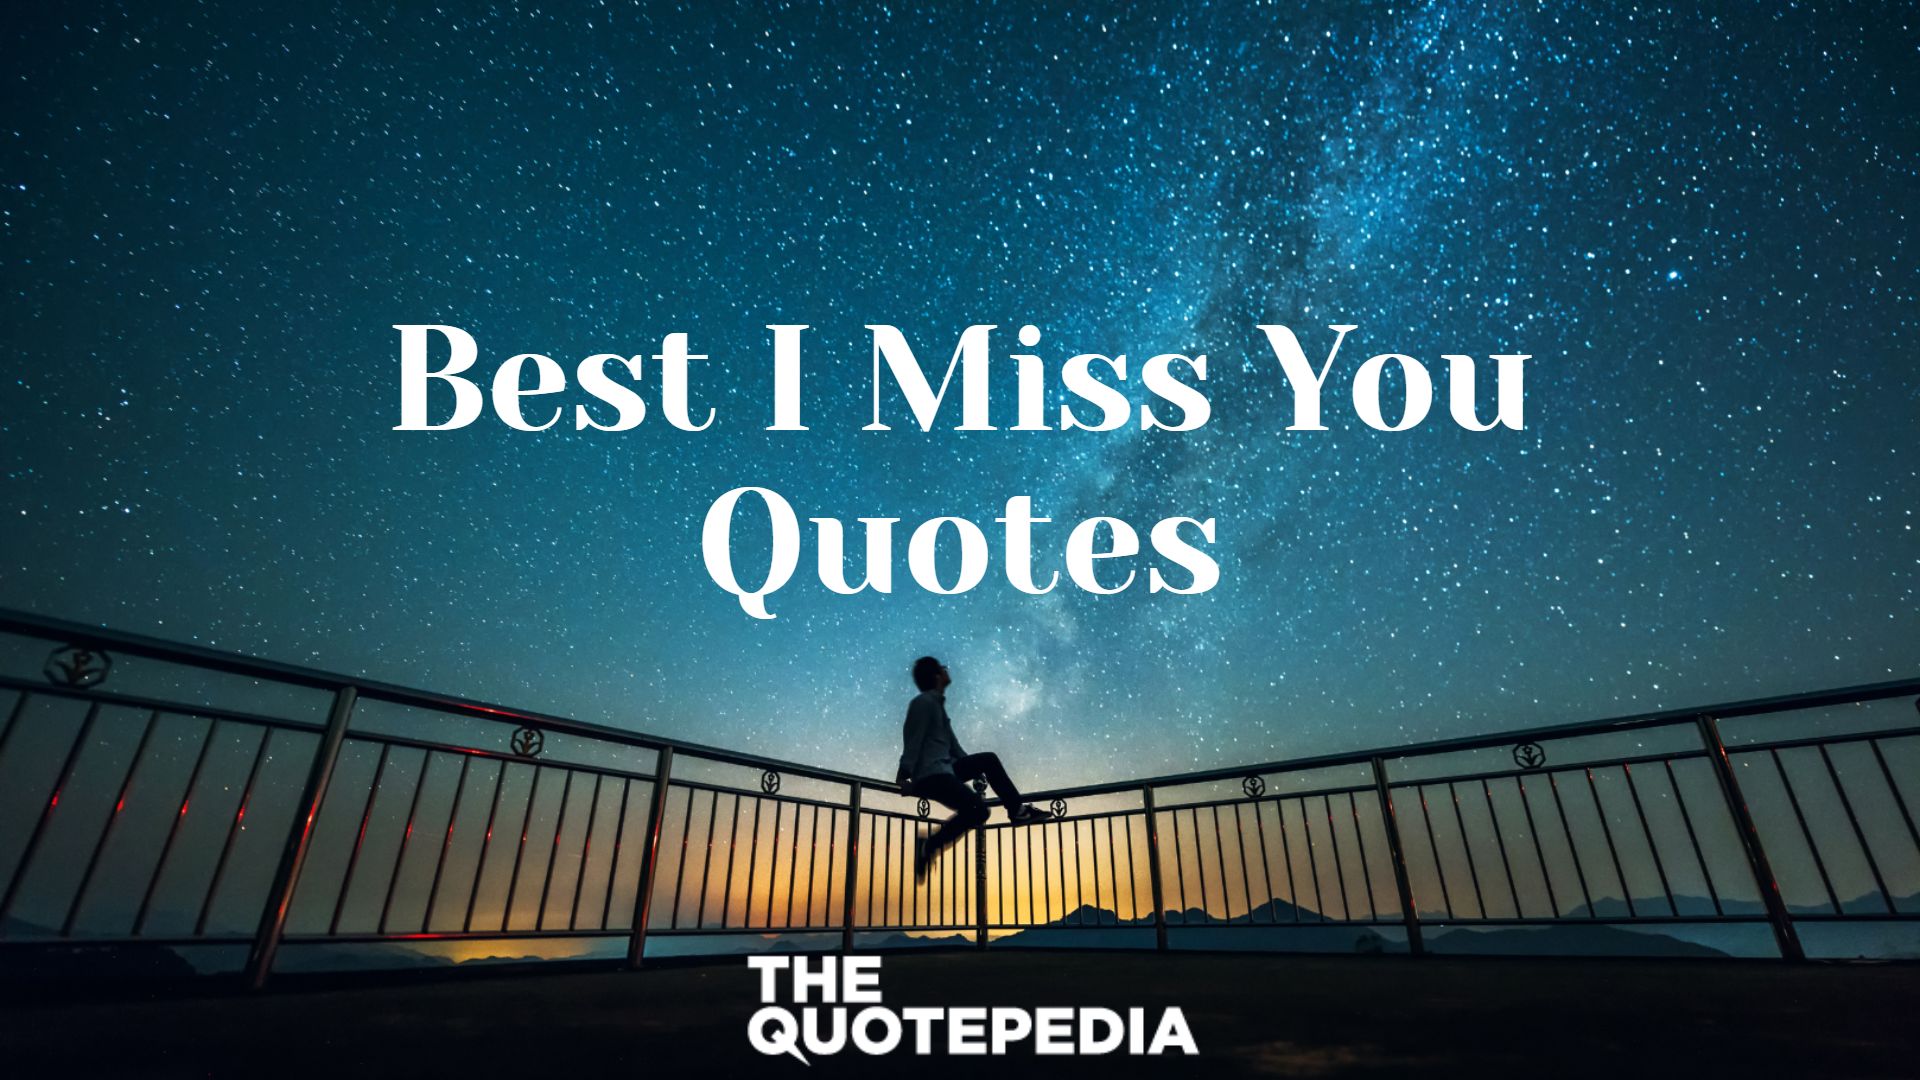 Best I Miss You Quotes